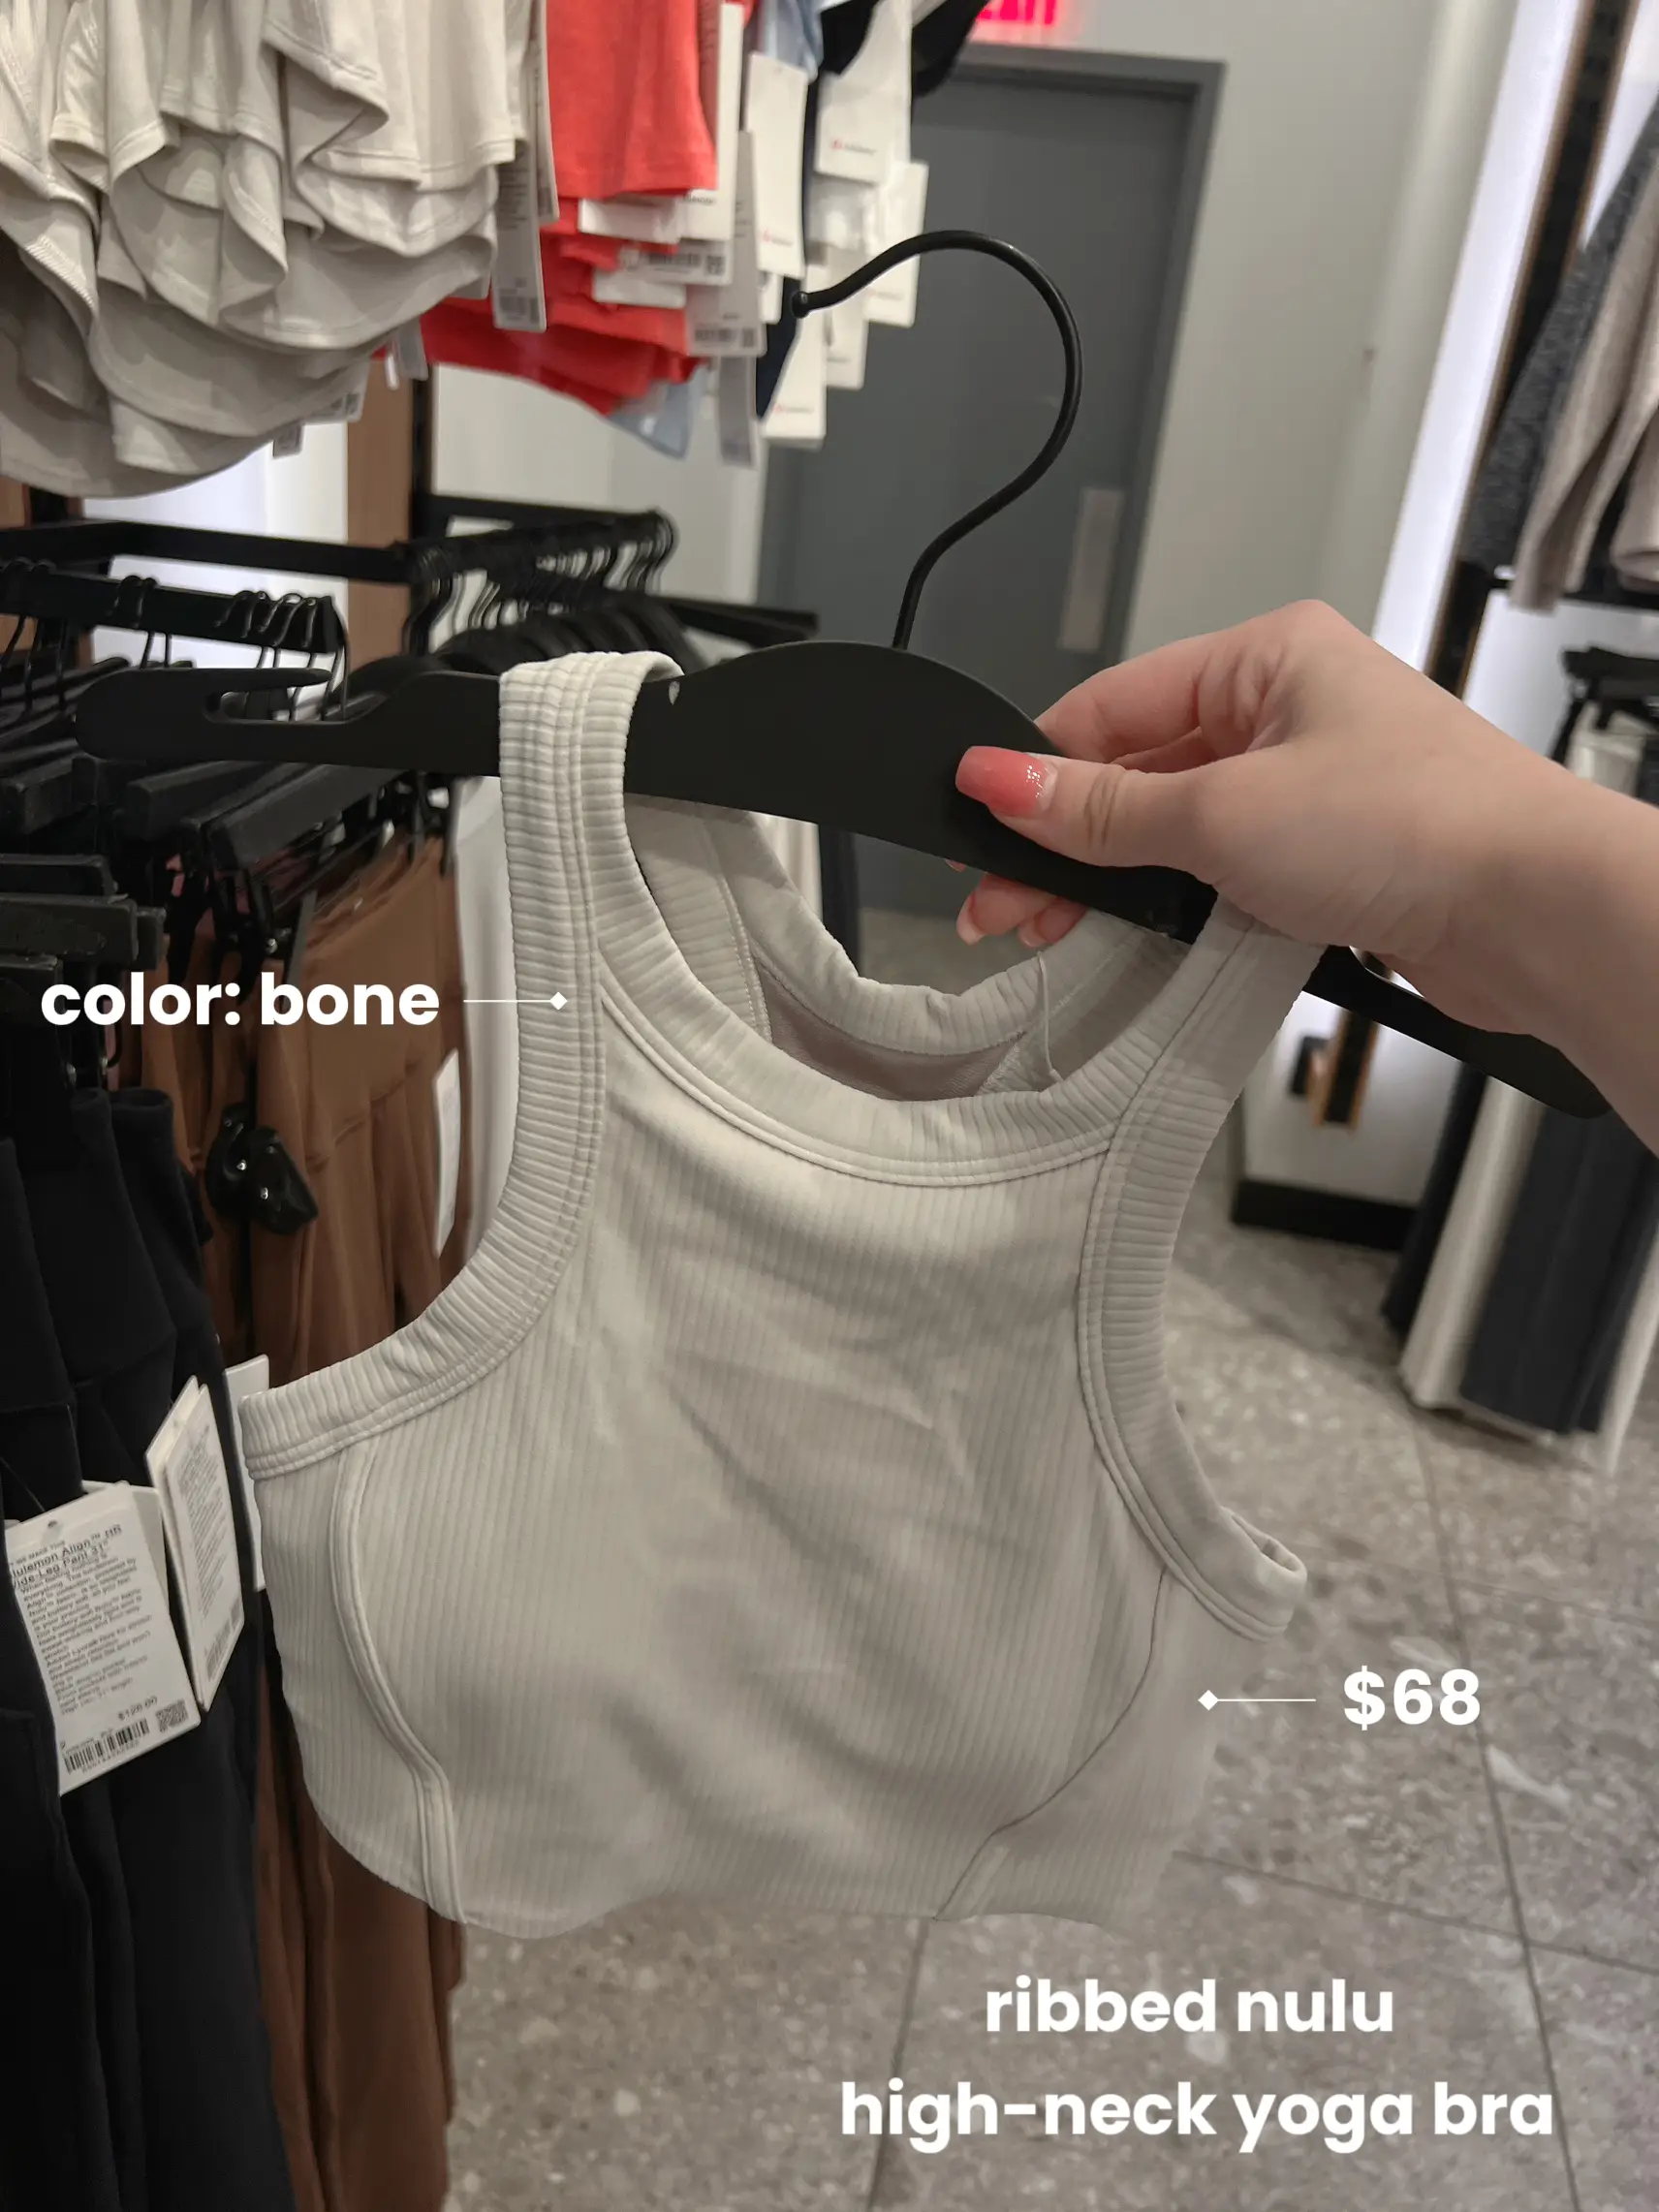 NEW LULULEMON BRAS, Gallery posted by amanda marie